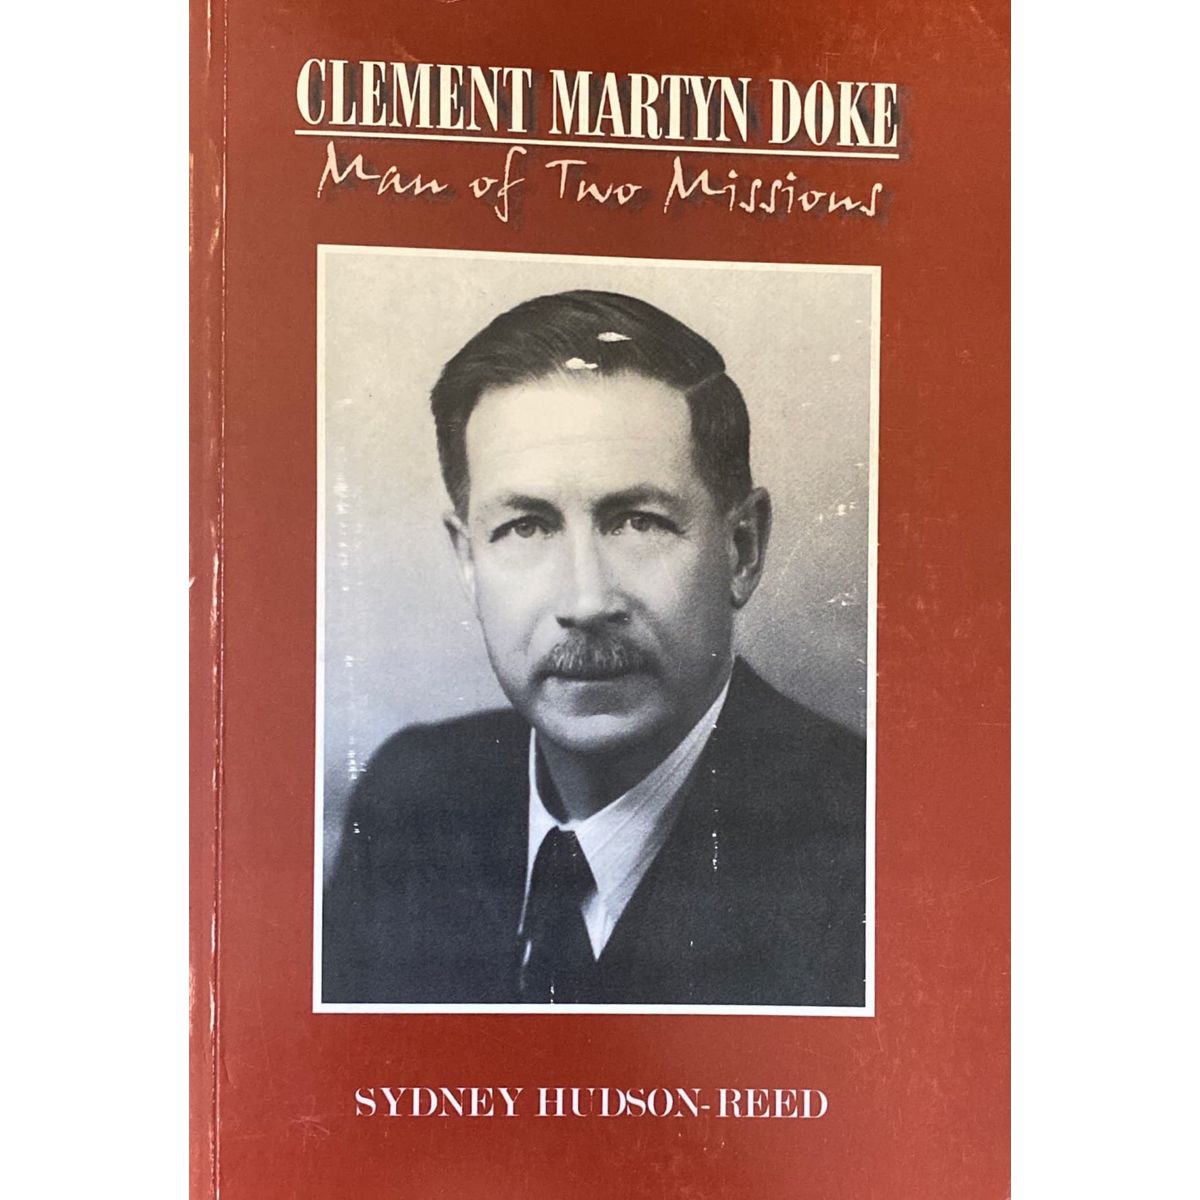 ISBN: 9780620229180 / 0620229187 - Clement Martyn Doke: Man of Two Missions by Sydney Hudson-Reed [1998]